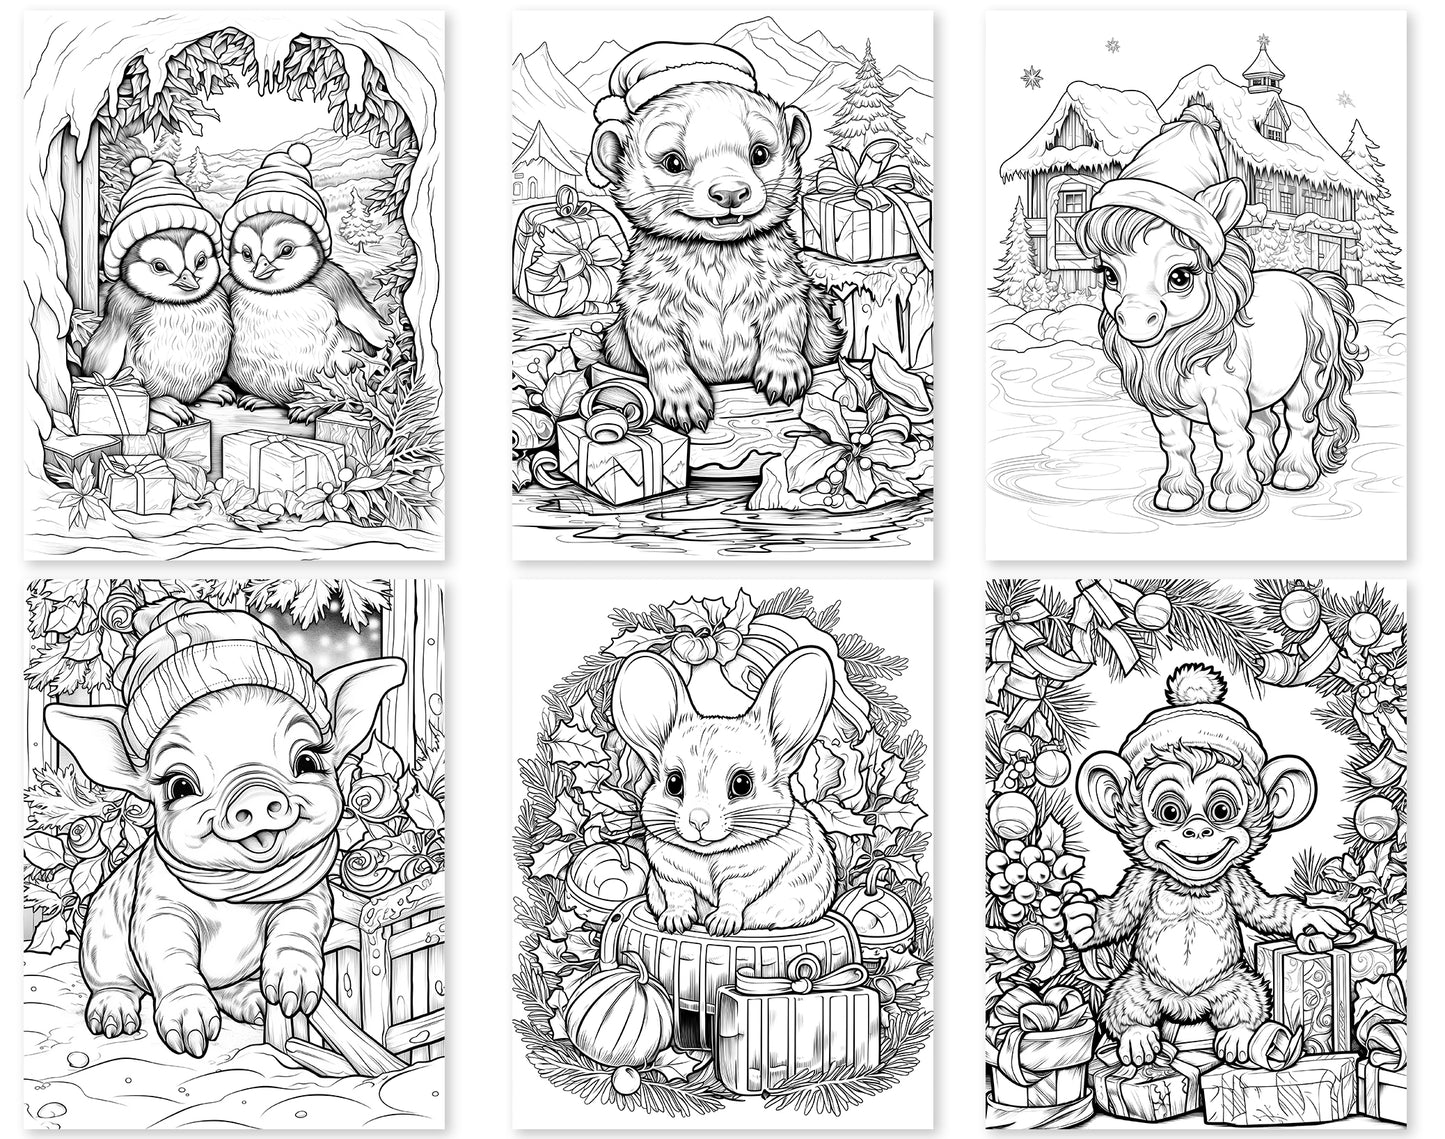 50 Christmas Critter 2 Coloring Pages - Instant Download - Printable